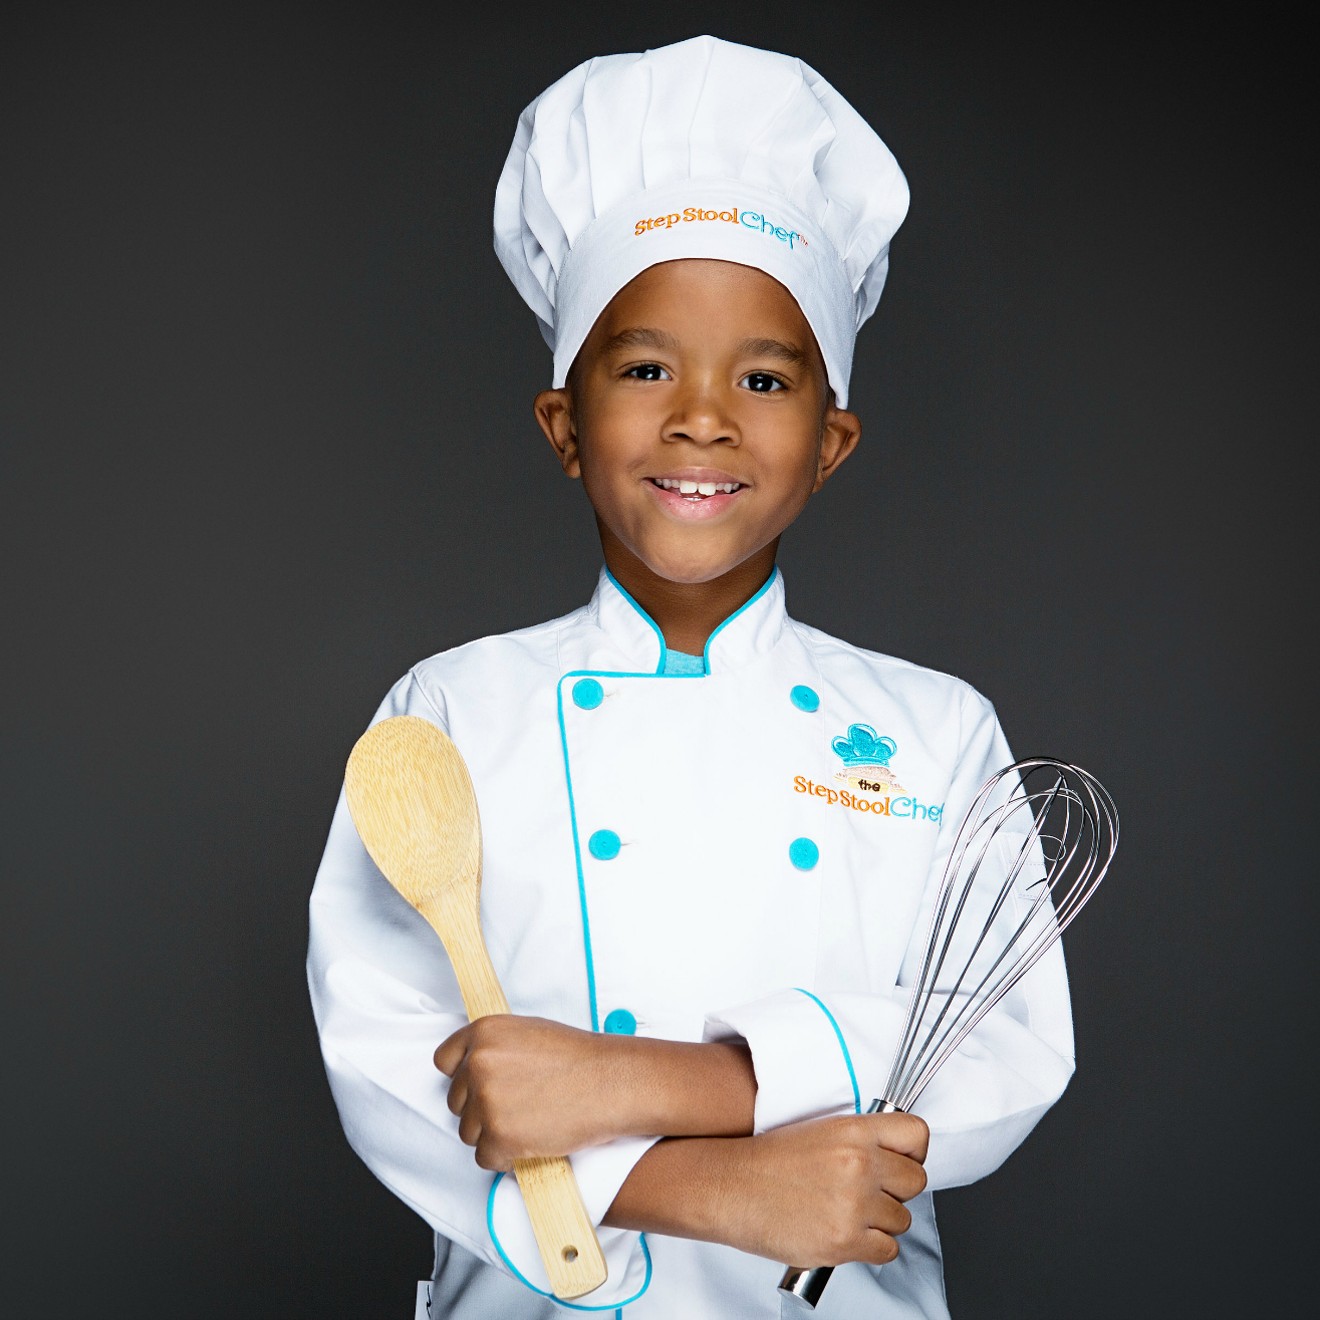 This 10-year-old Dallasite already has his own cooking academy.